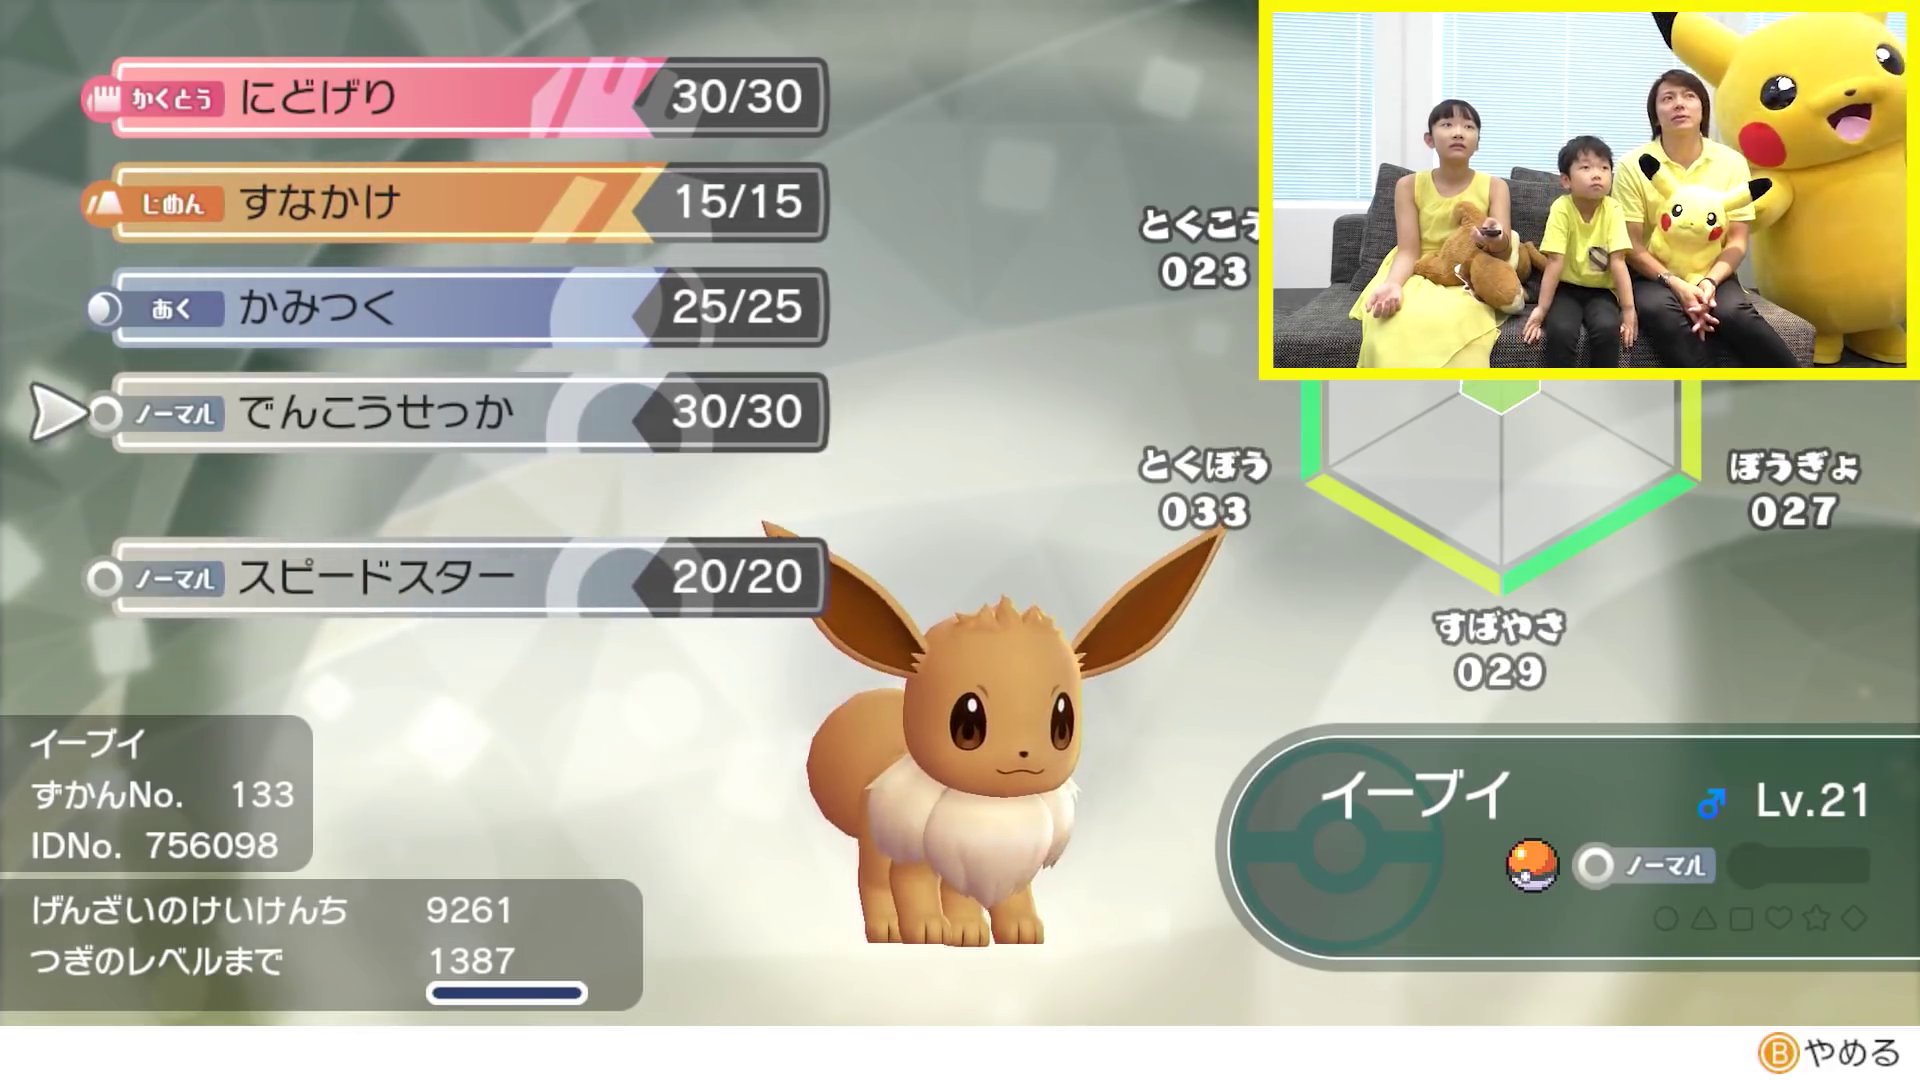 Eevee - Evolutions, Location, and Learnset